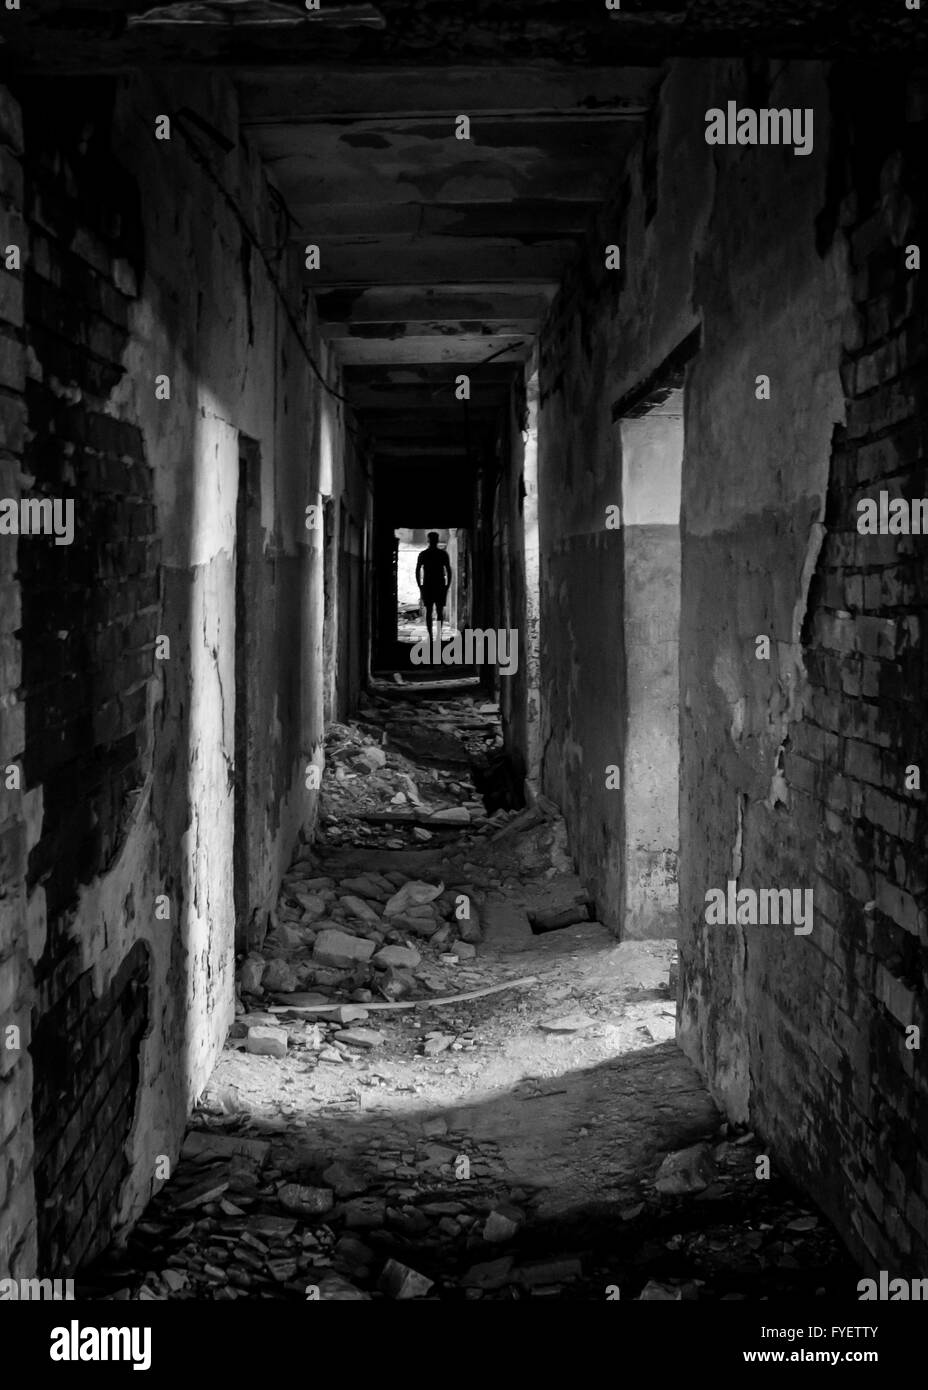 Destroyed at the end of the corridor which is a man. Stock Photo